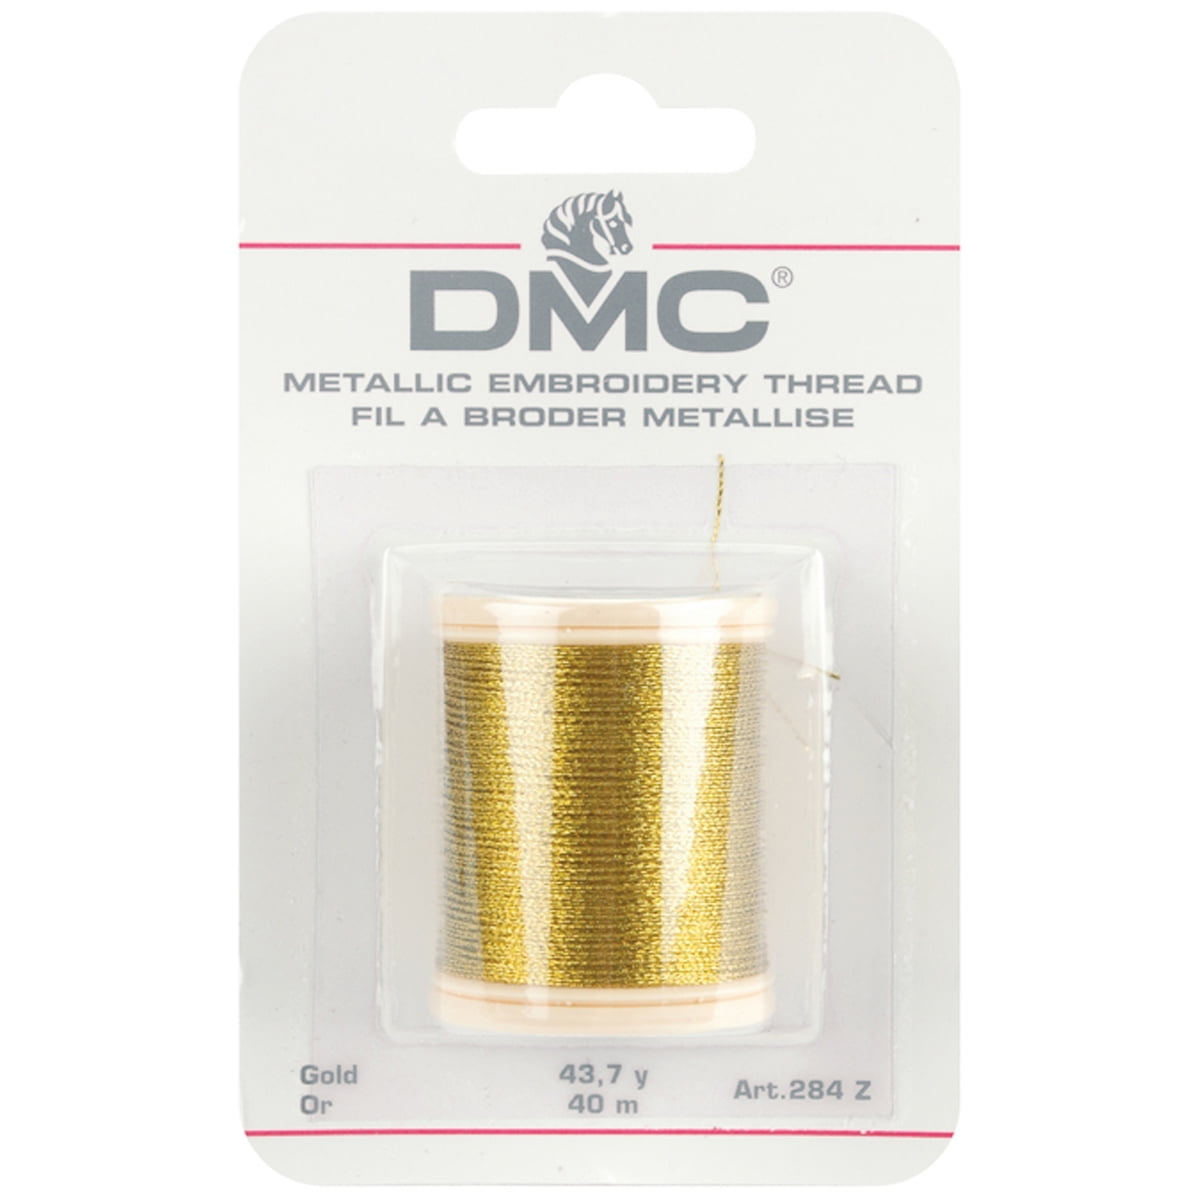 New brothread 4 Gold Metallic Embroidery Machine Thread Kit 500M (550Y)  Each Spool for Computerized Embroidery and Decorative Sewing